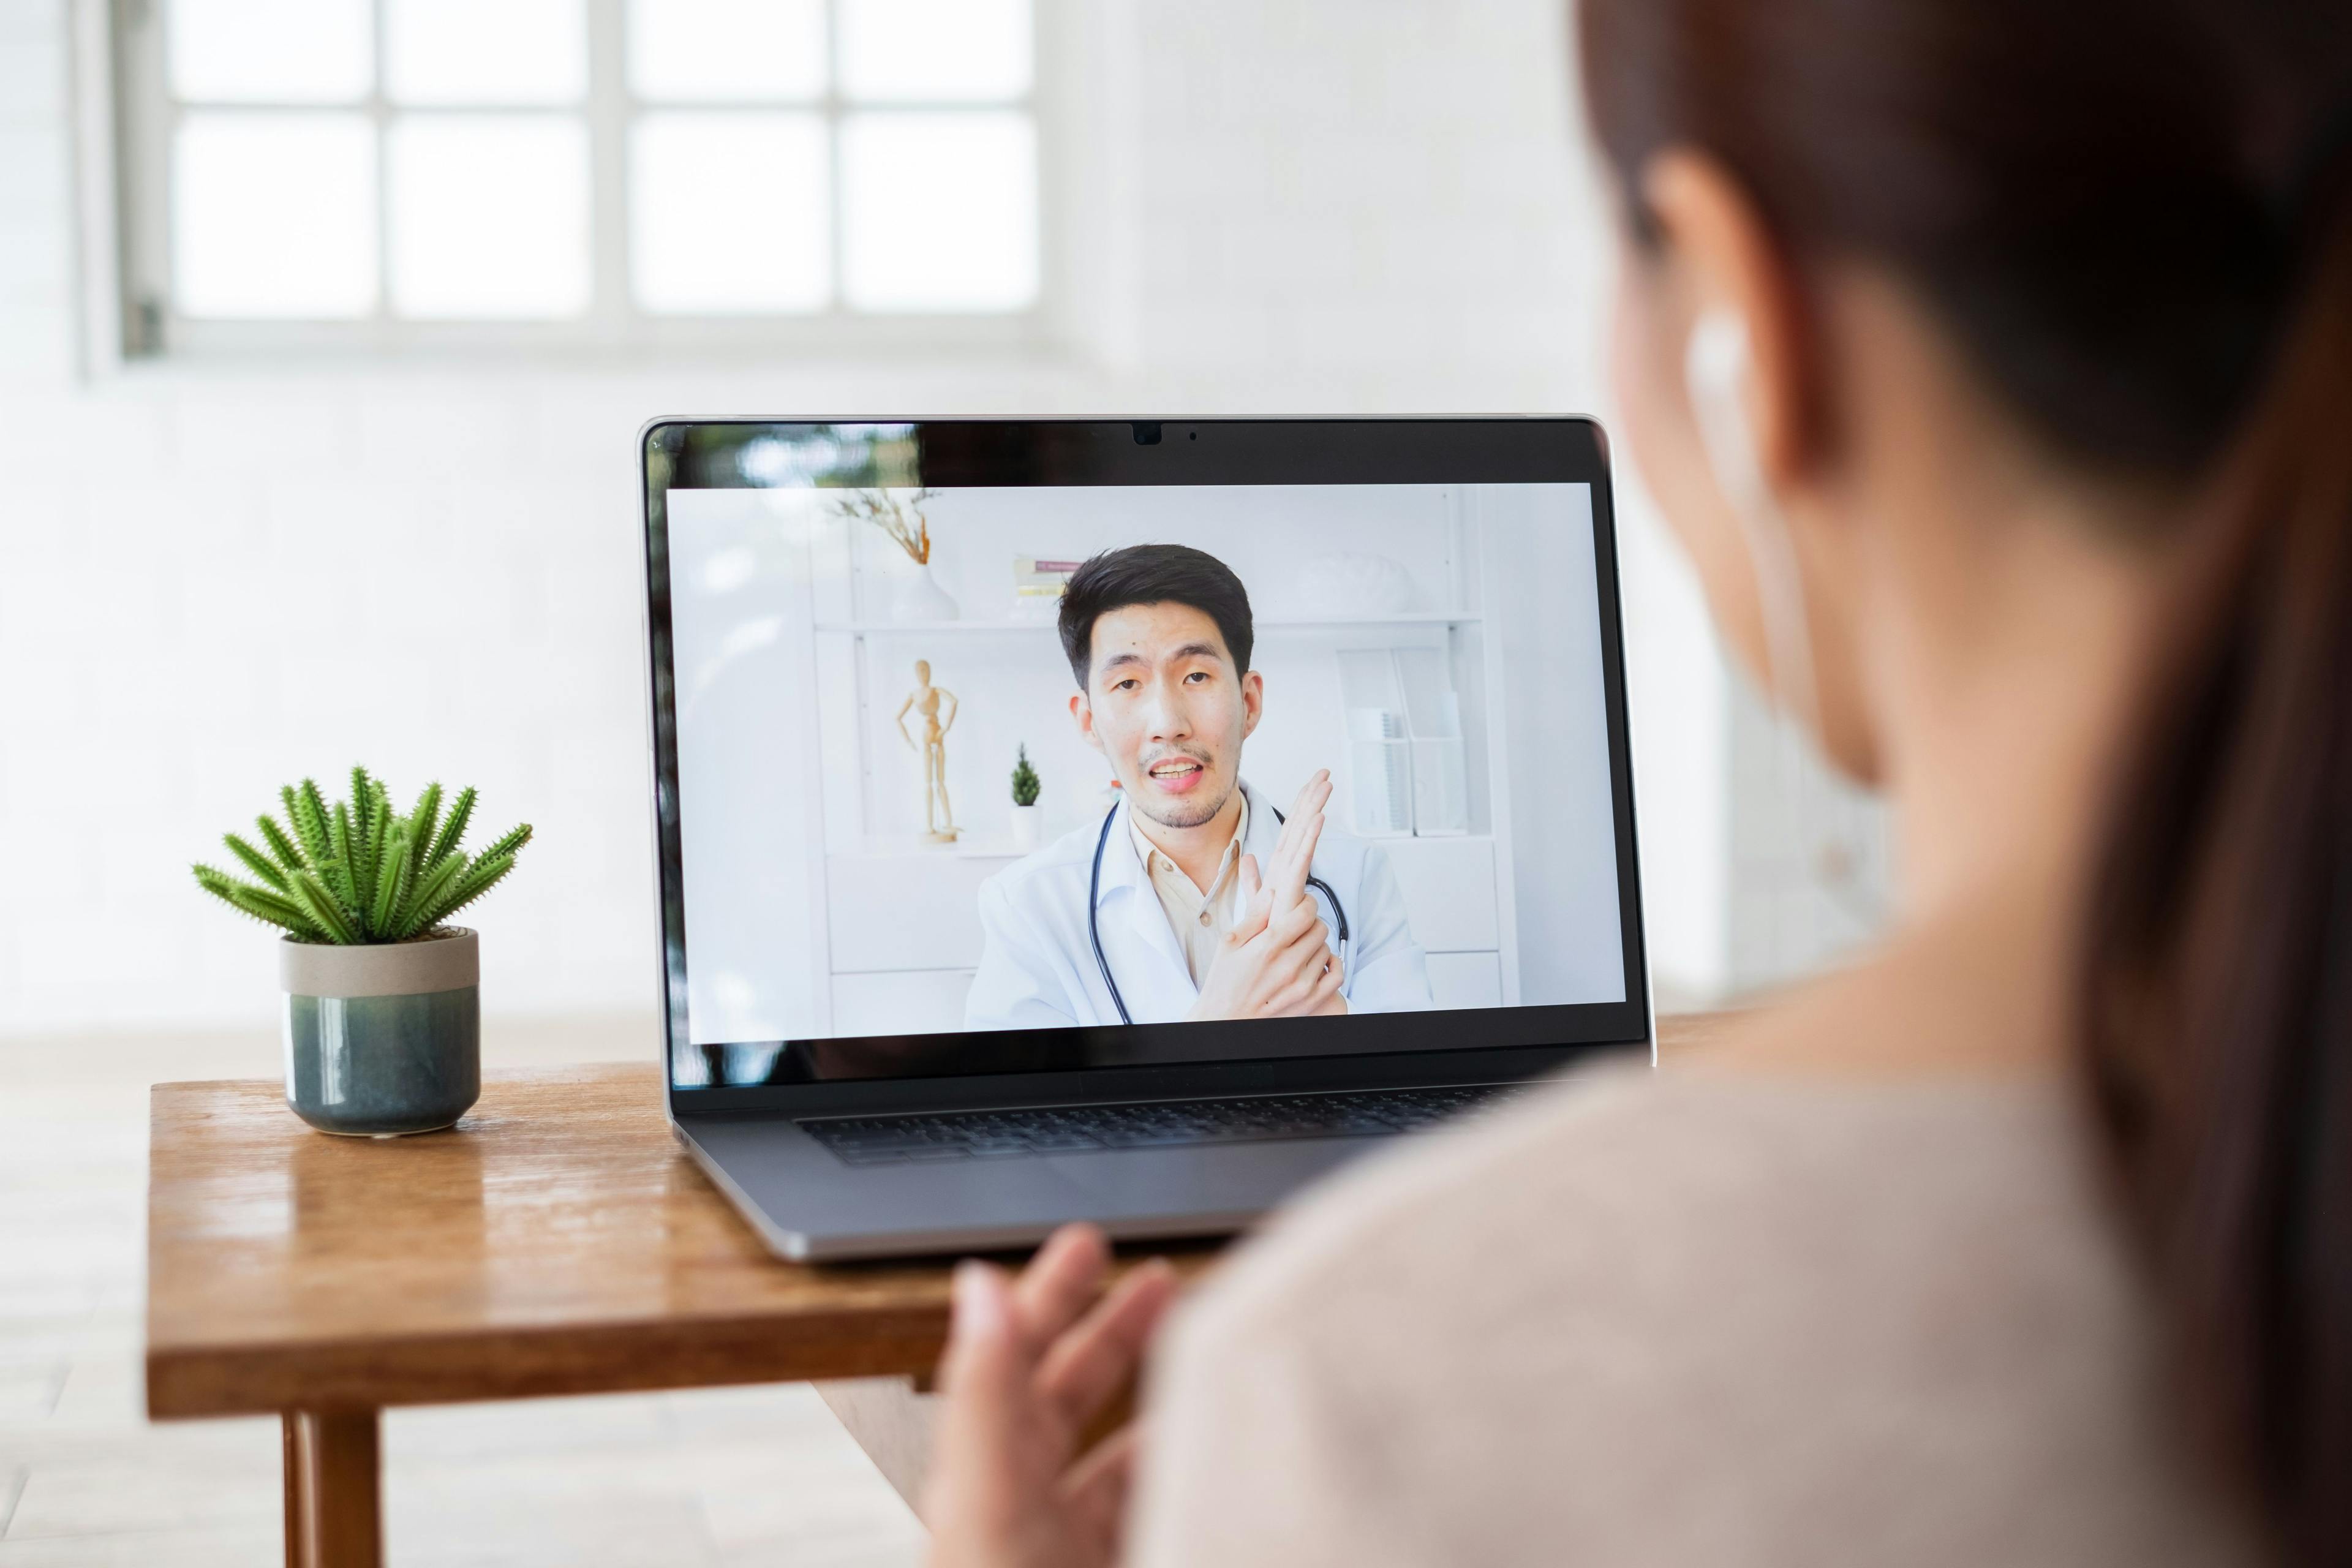 How hospitals and health systems could do more with telehealth